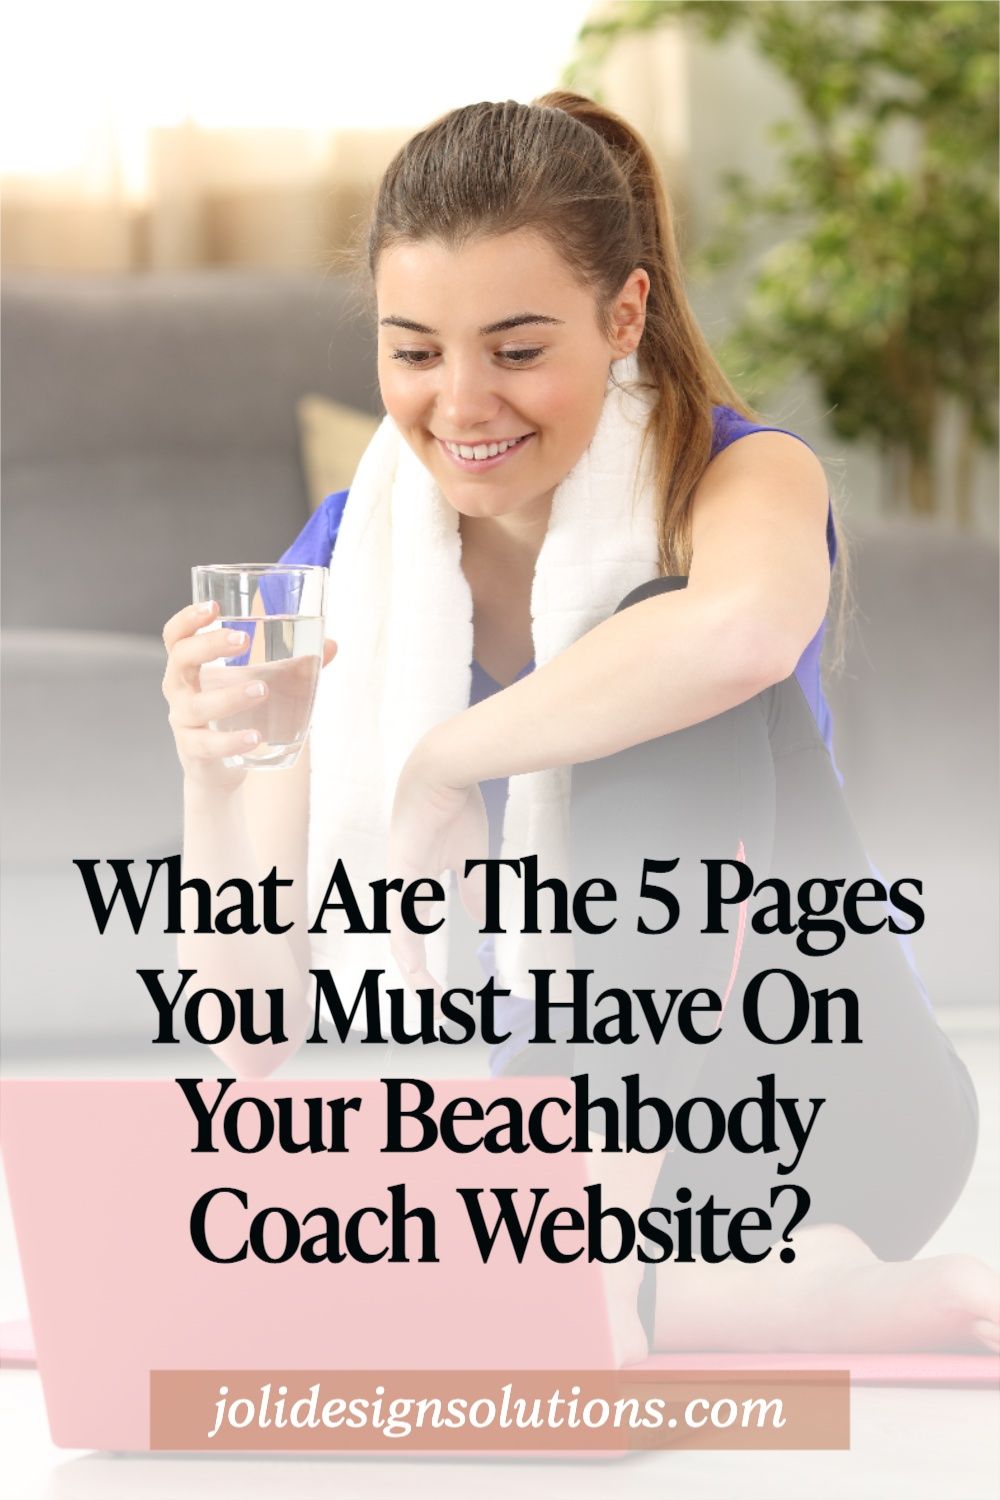 What Are The 5 Pages You Must Have On Your Beachbody Coach Website_